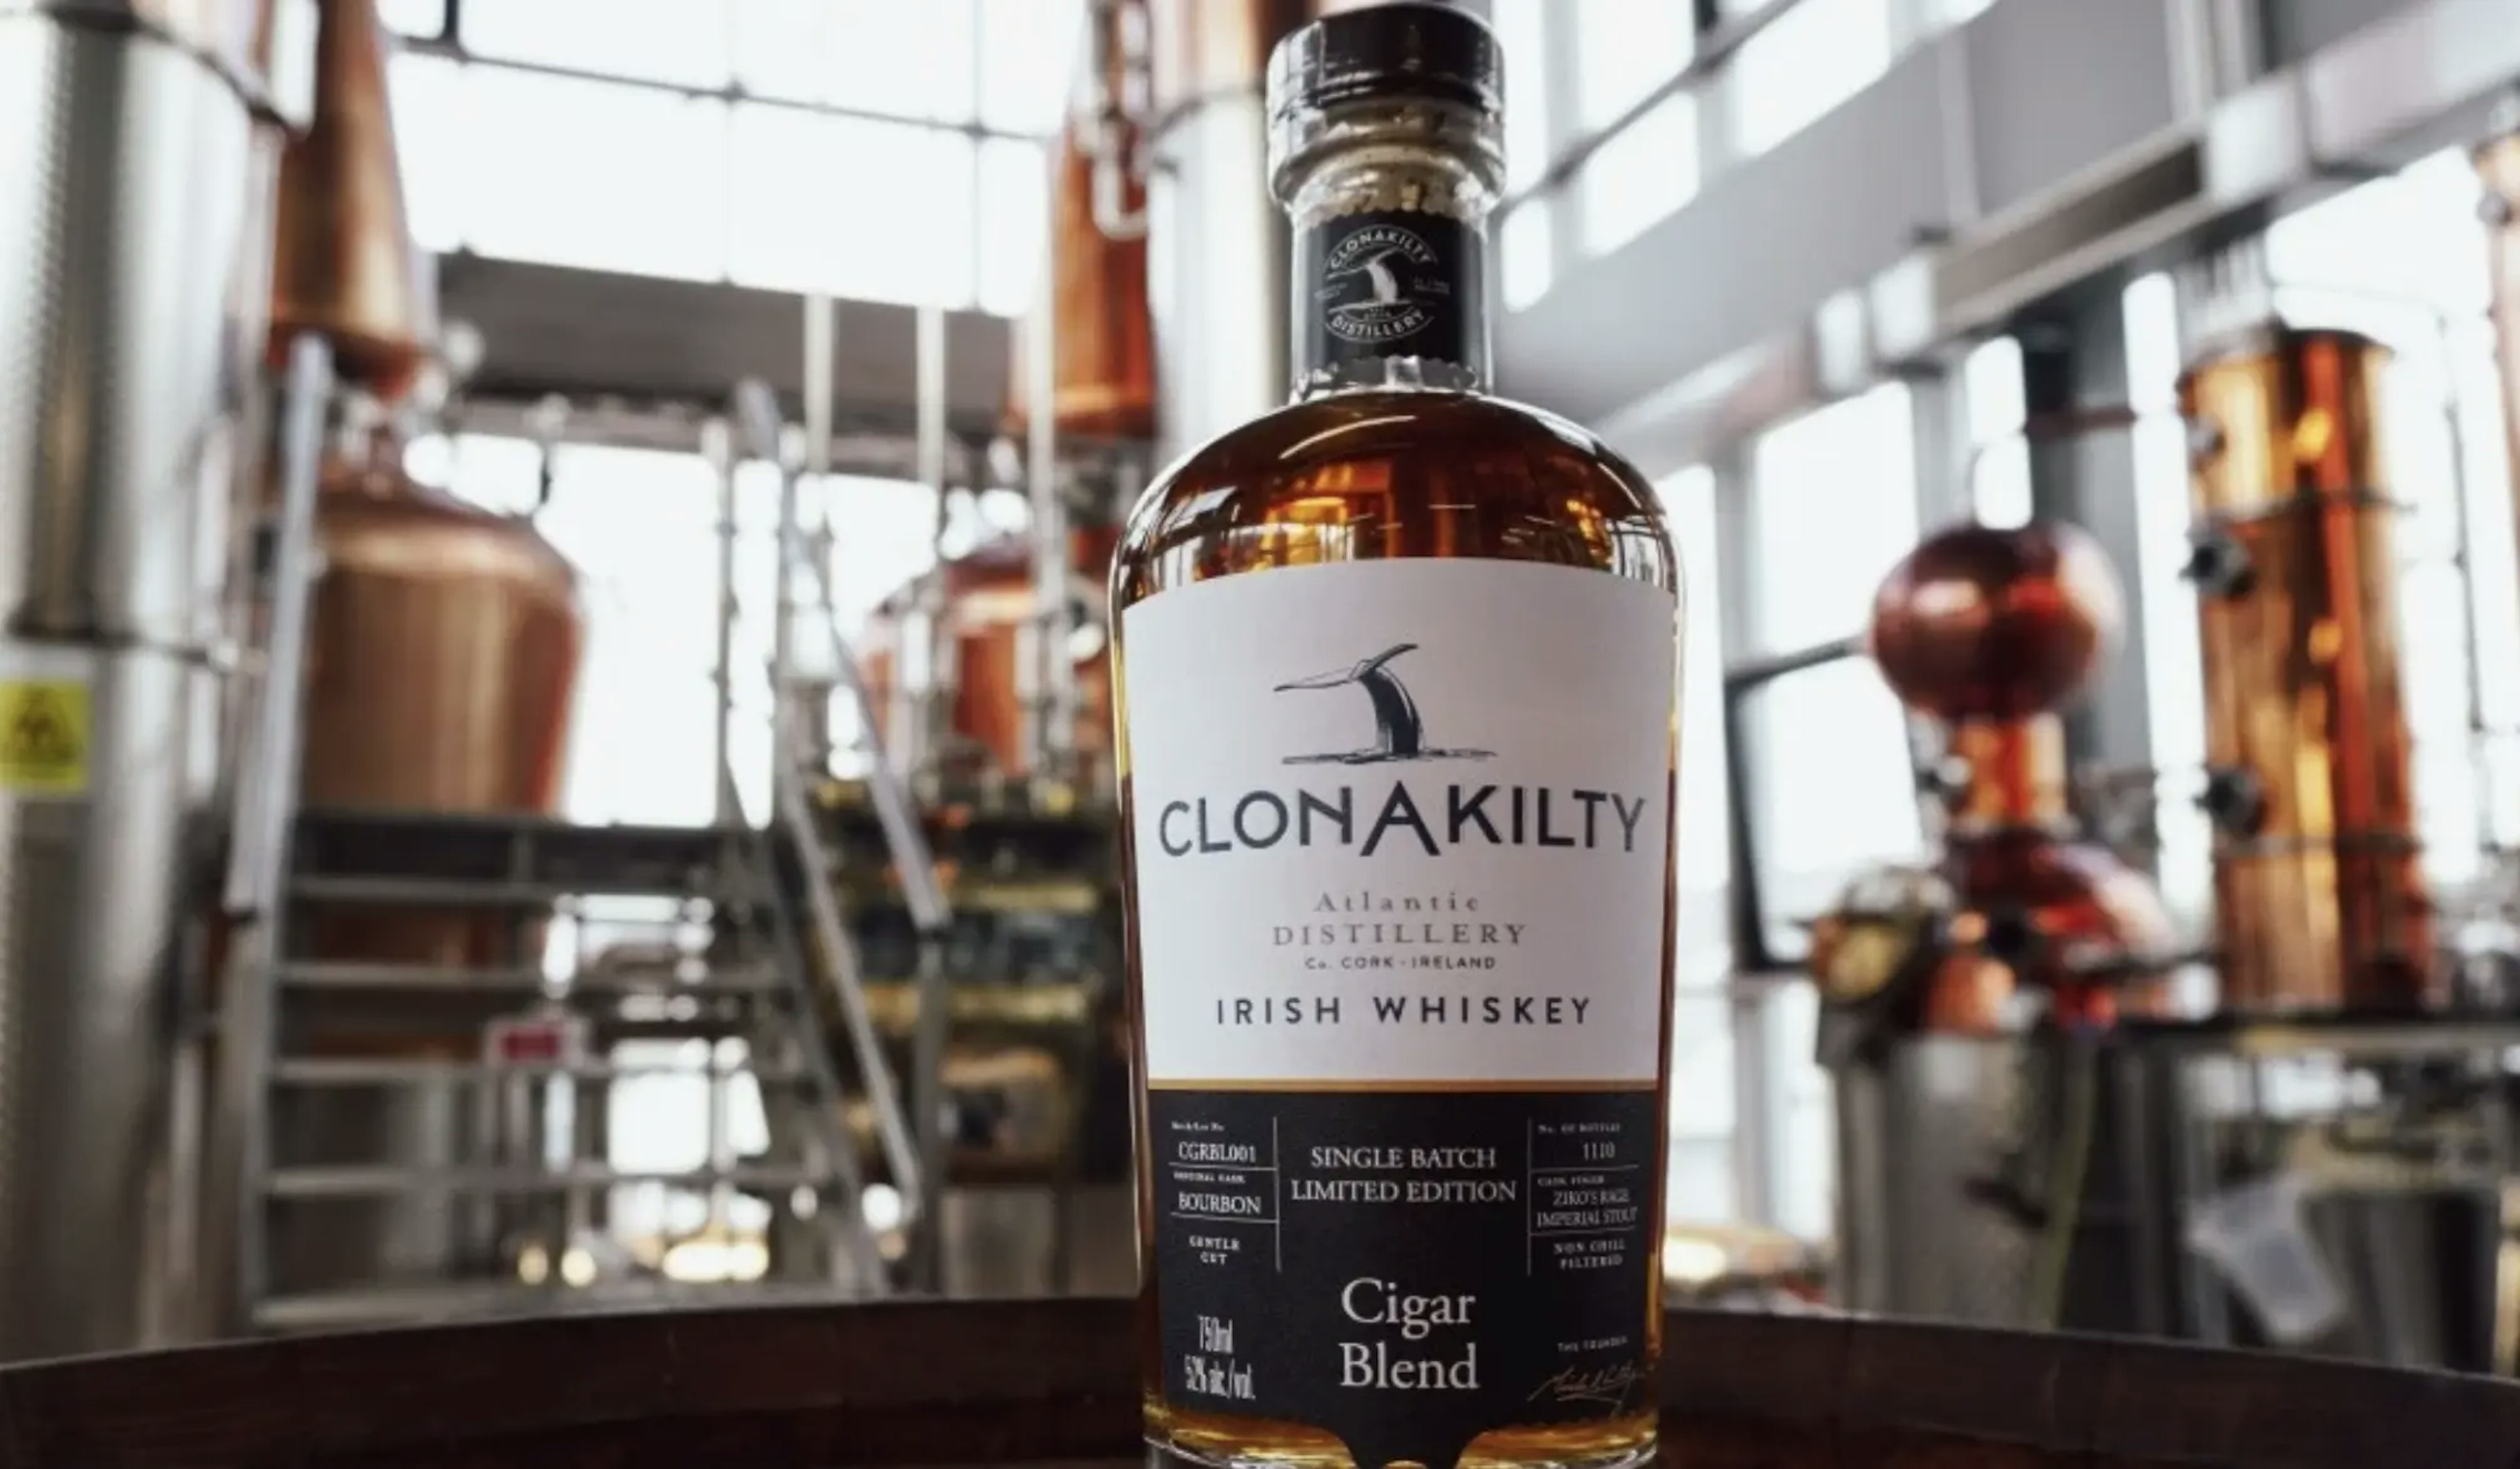 Automating 40% of Clonakilty distillery processes and improving traceability